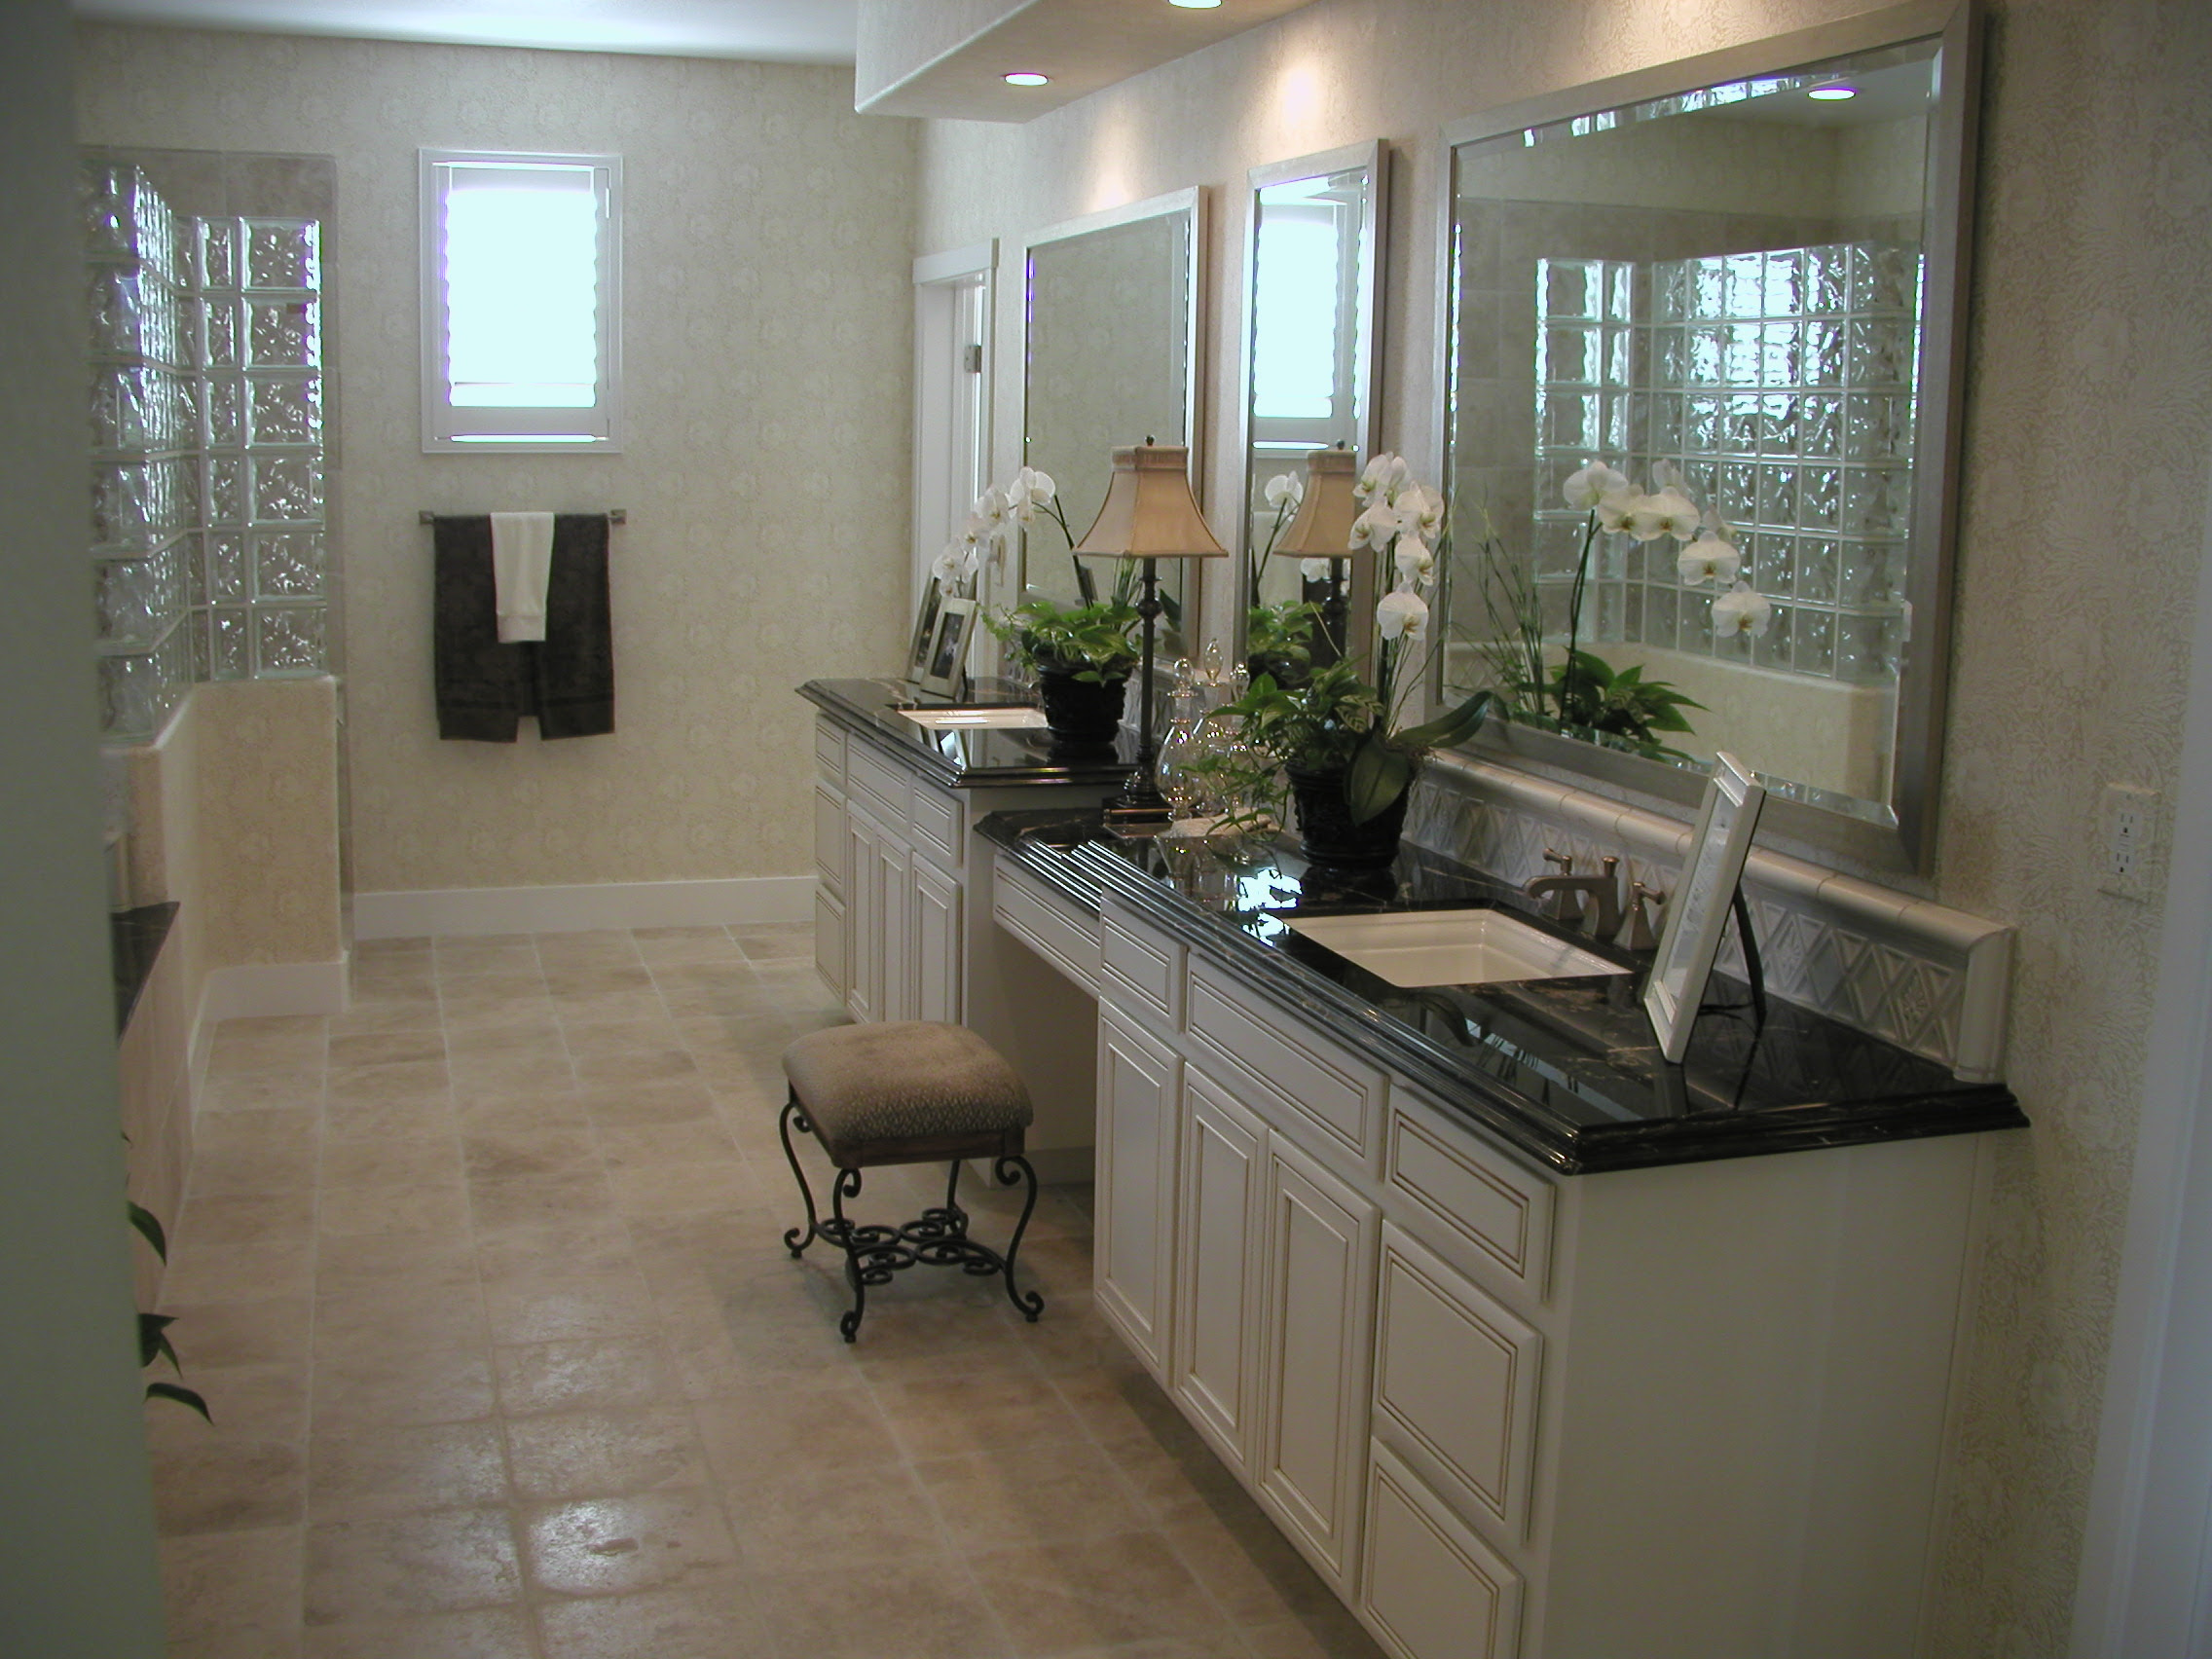 What elements to Include In a His 'n Hers Bathroom Design